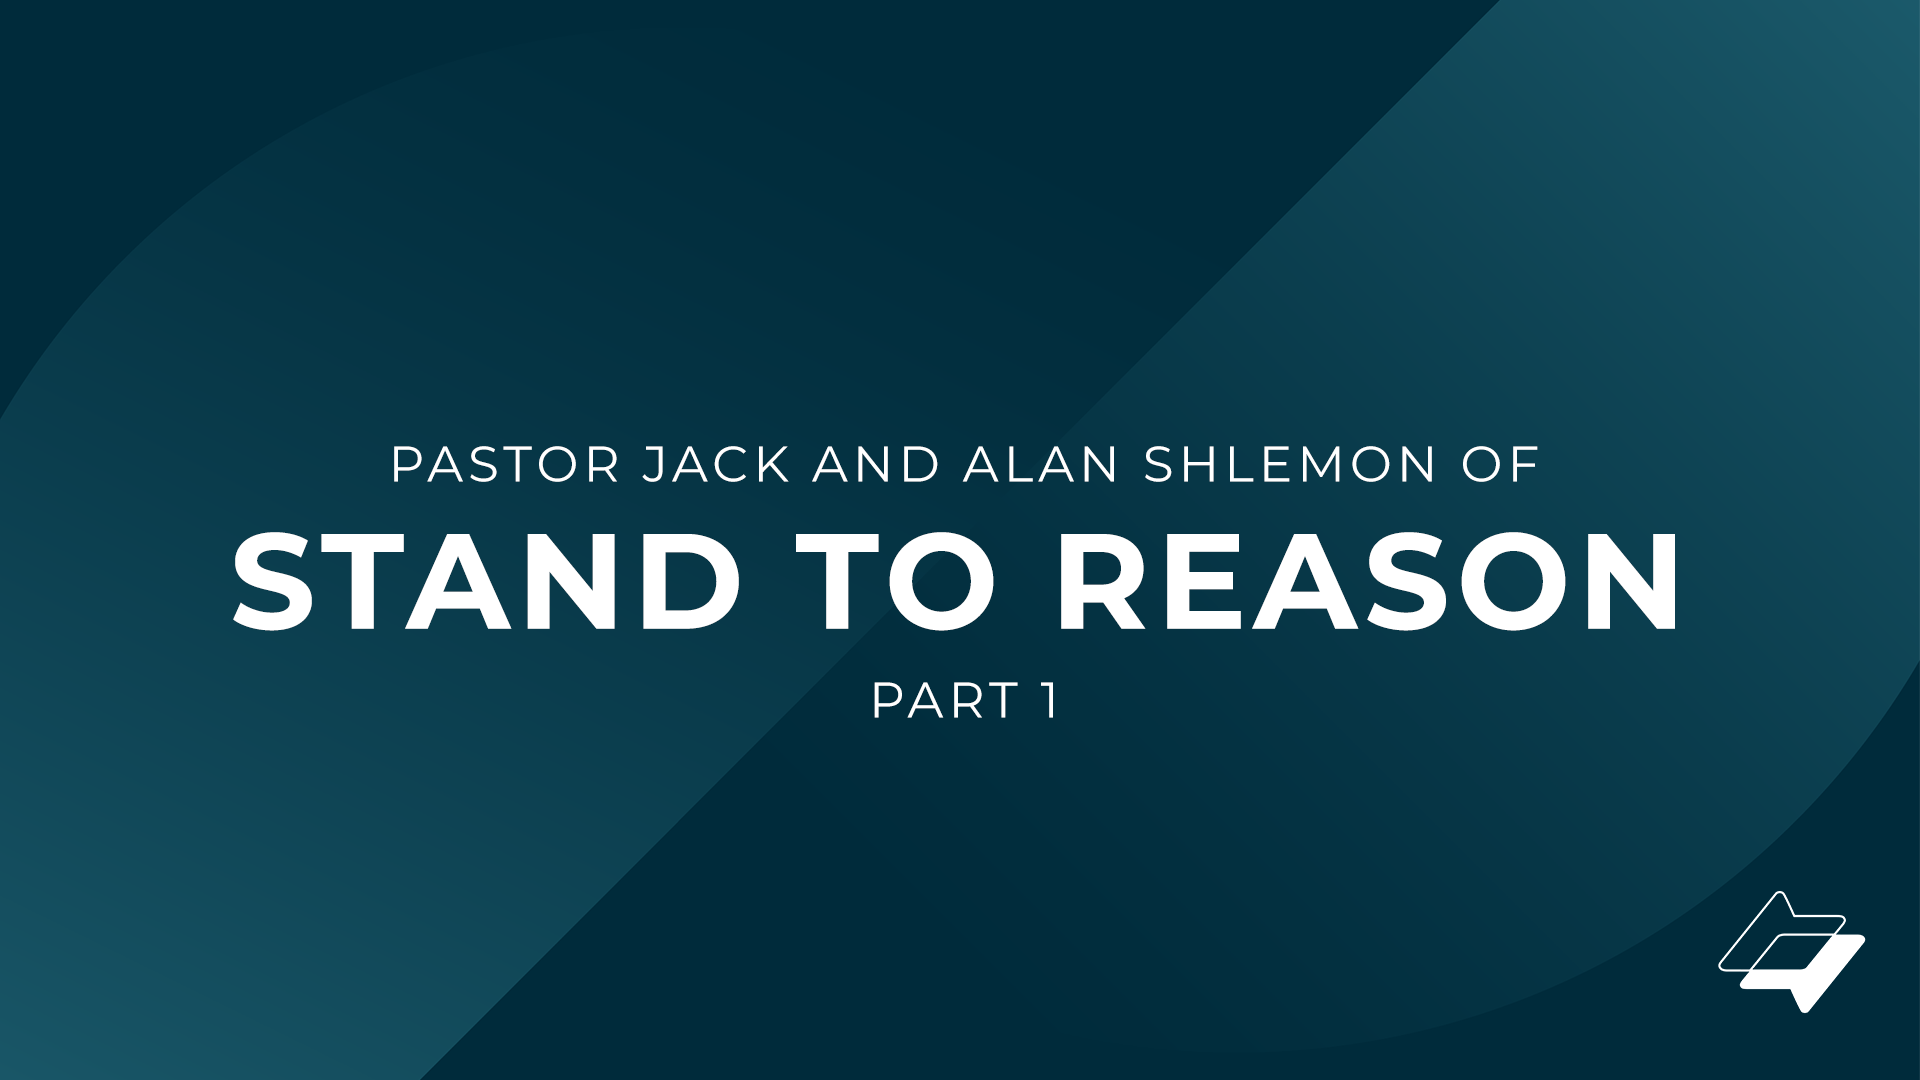 Pastor Jack and Alan Shlemon of Stand to Reason – Part 1